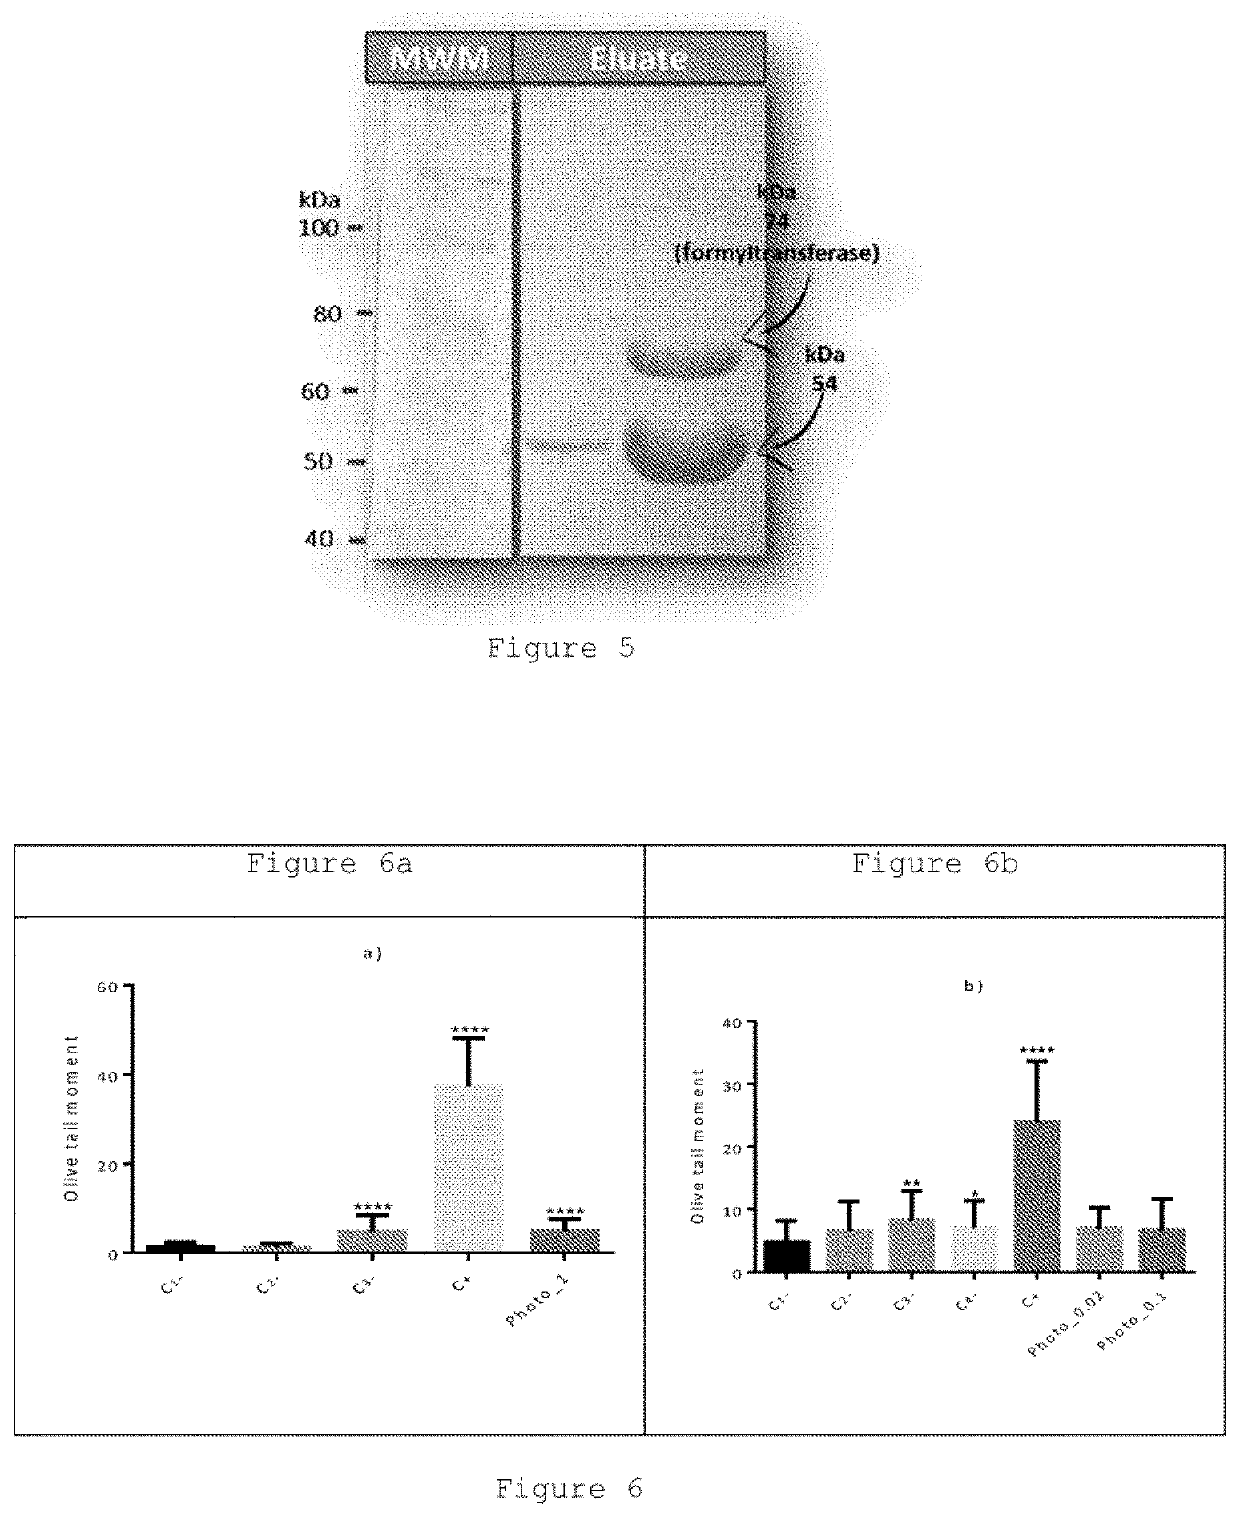 Genetically modified bacteria producing three DNA repair enzymes and method for the evaluation of DNA repair activity